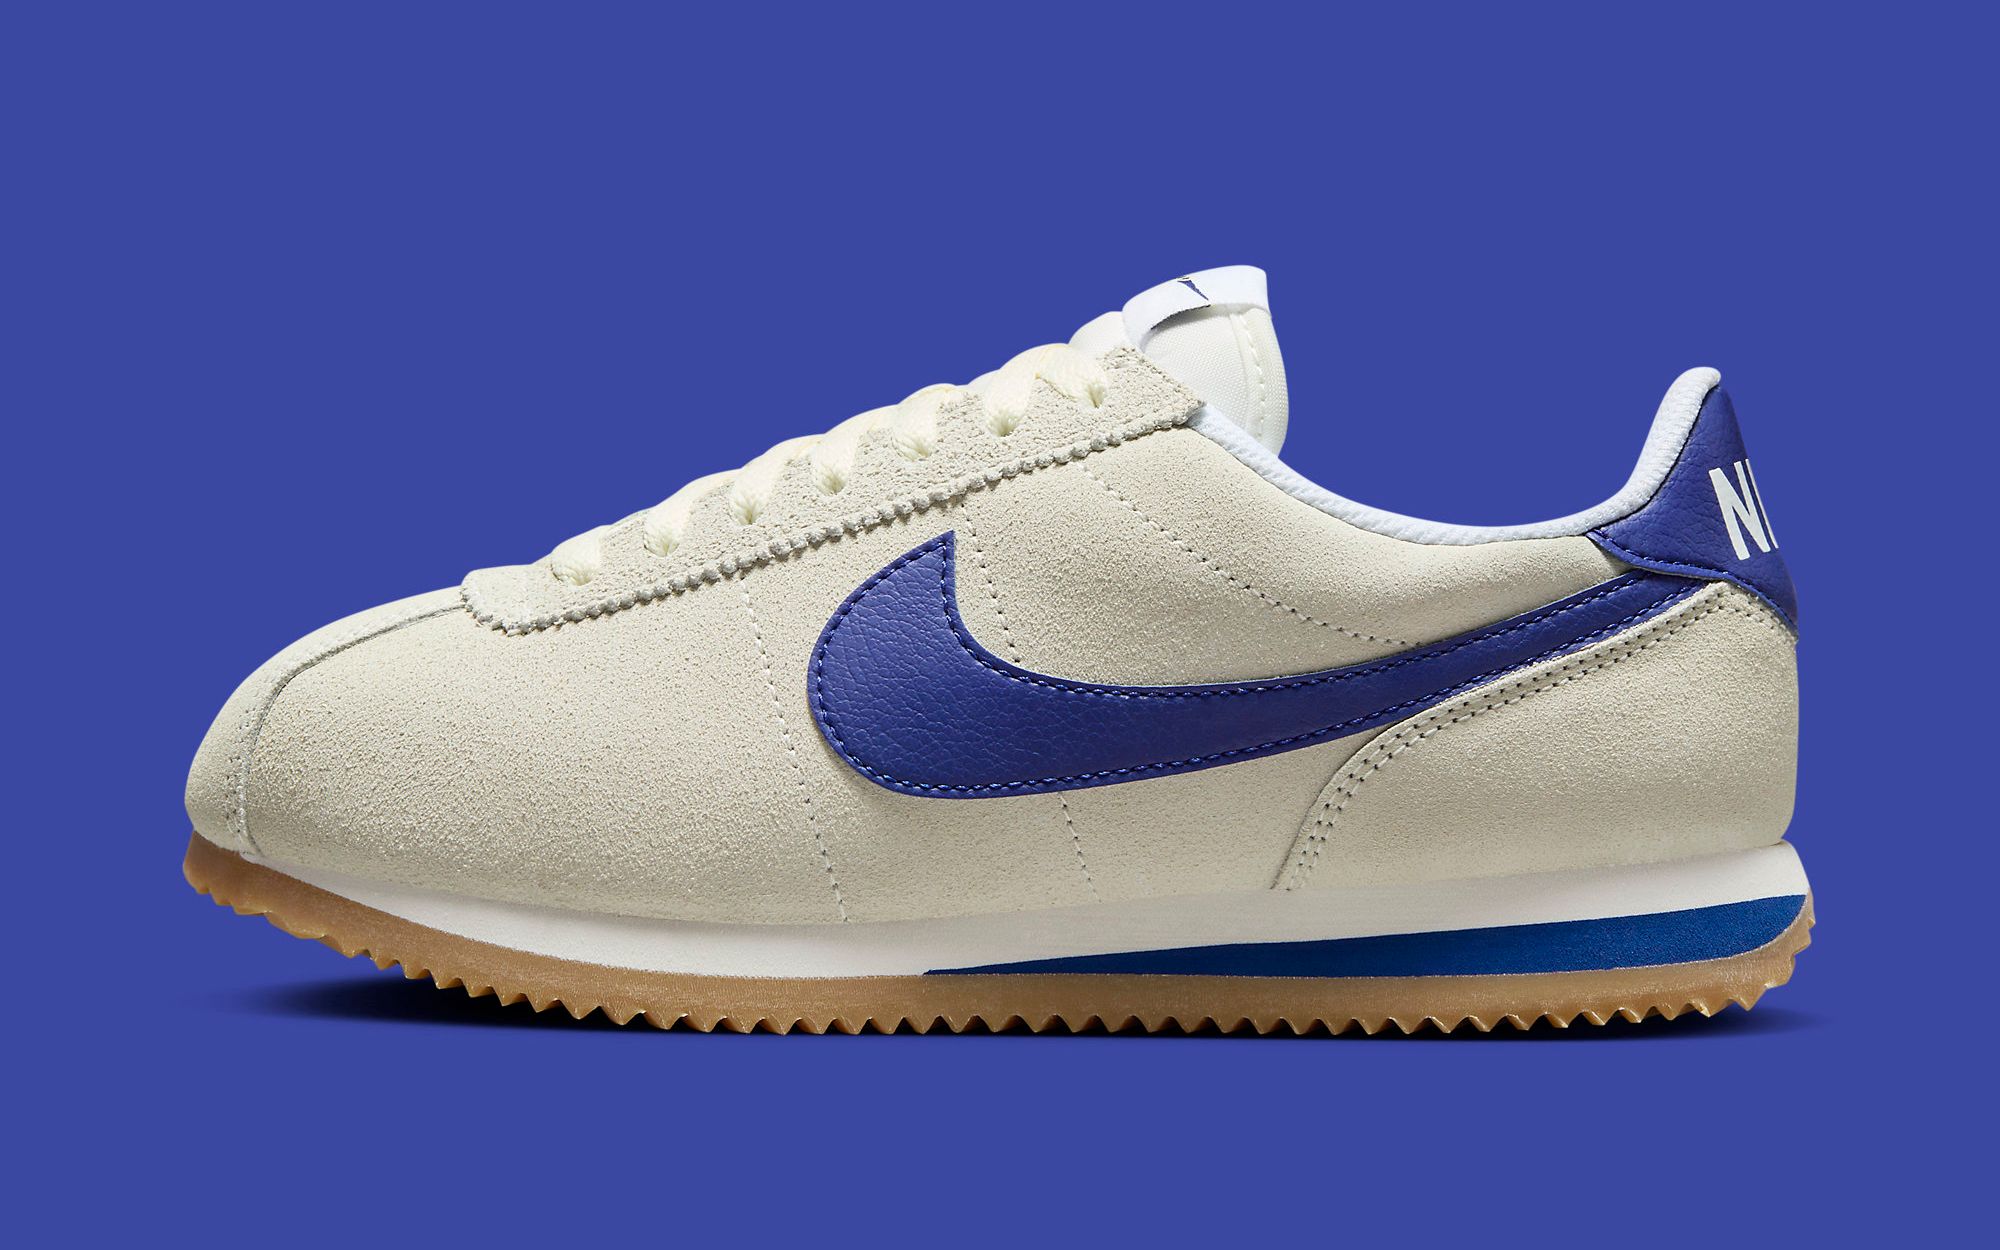 The Nike Cortez Joins the Extensive 